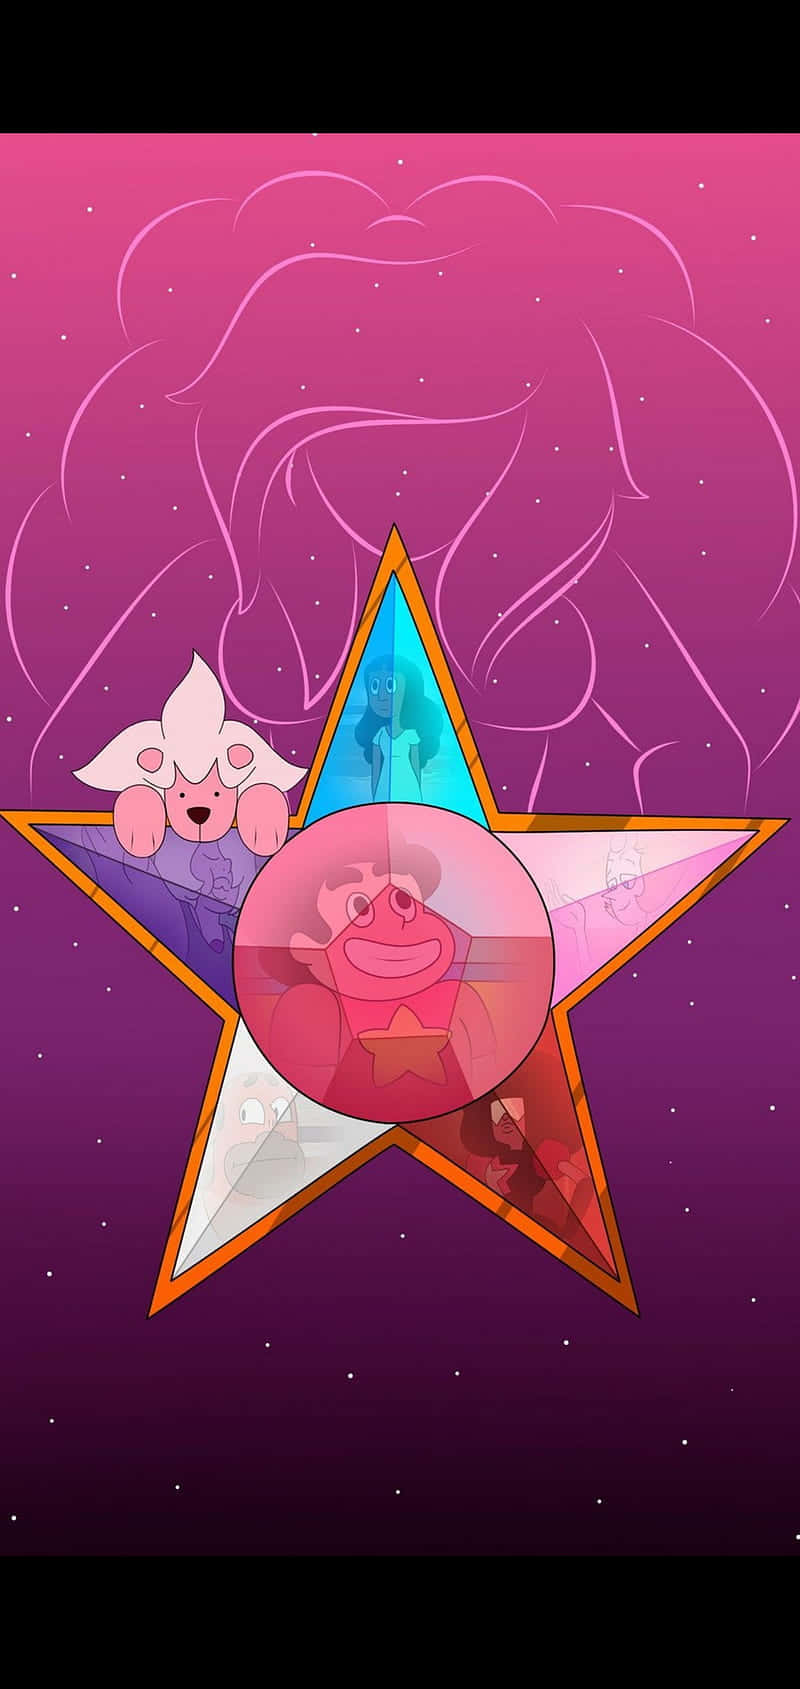 A Pink Star With A Pink Pig Inside Wallpaper